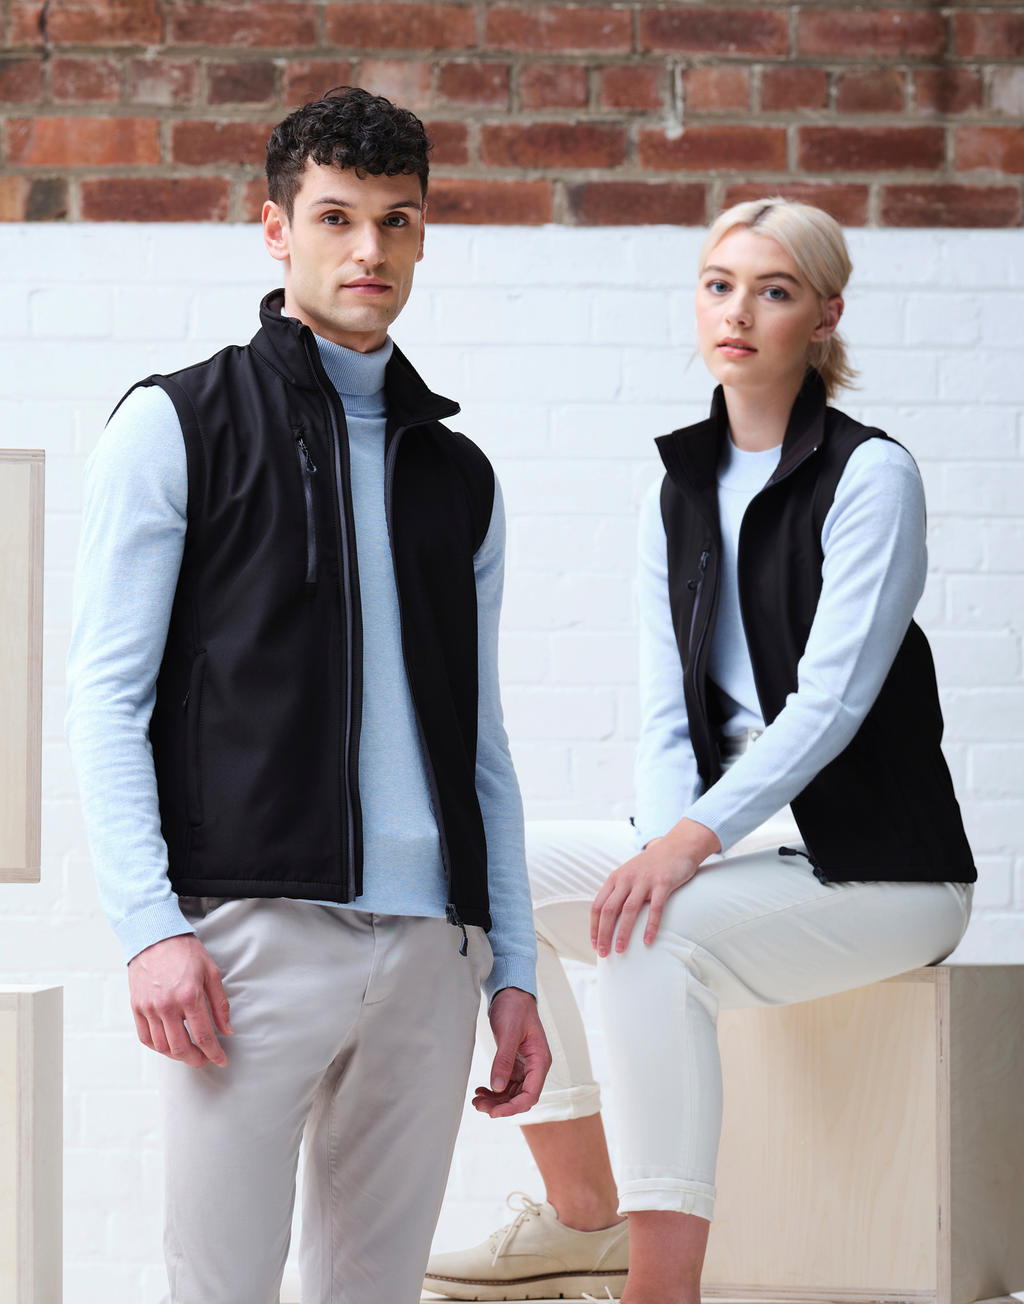  Honestly Made Recycled Softshell Bodywarmer in Farbe Black